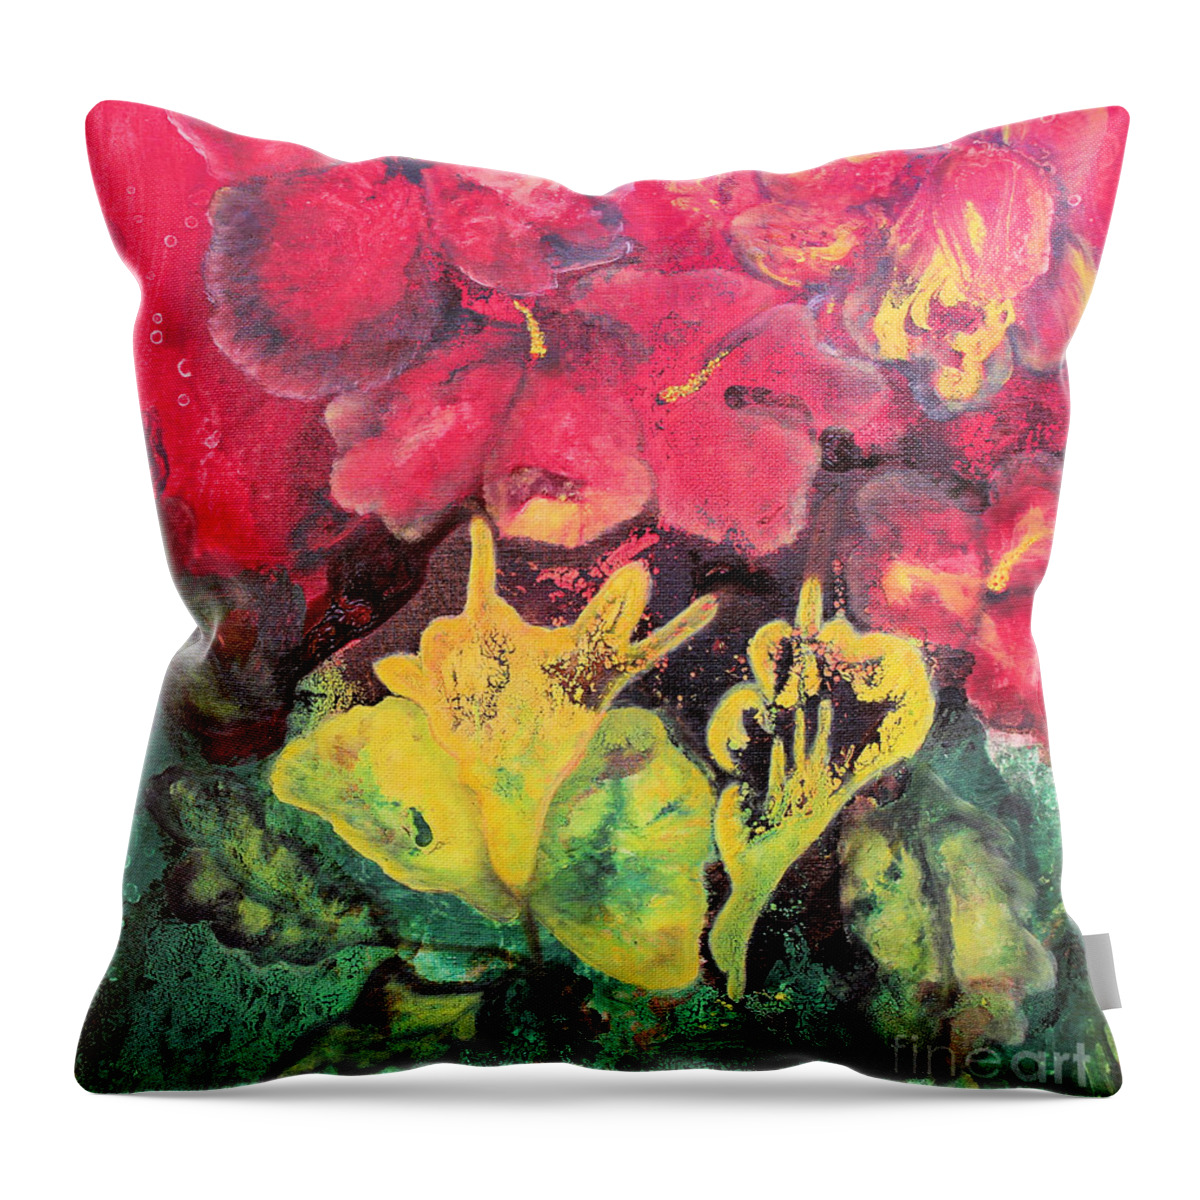 Mexican Art Throw Pillow featuring the painting Canto al Color by Sonia Flores Ruiz